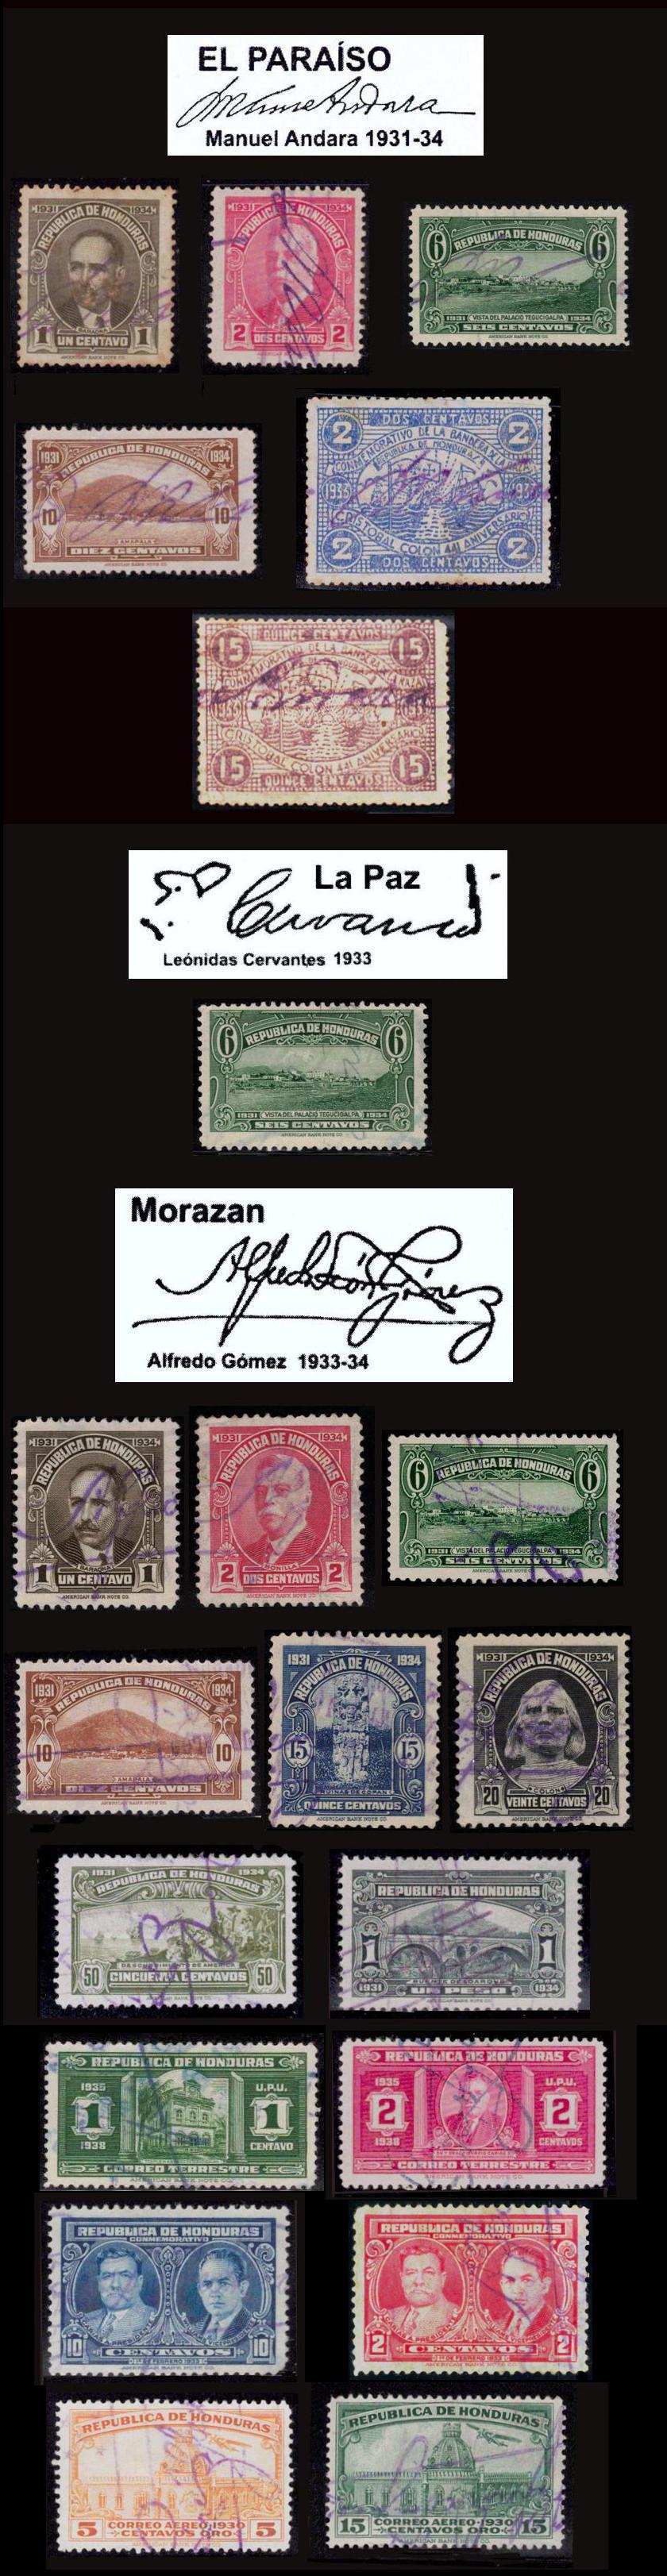 page 3 signature stamps